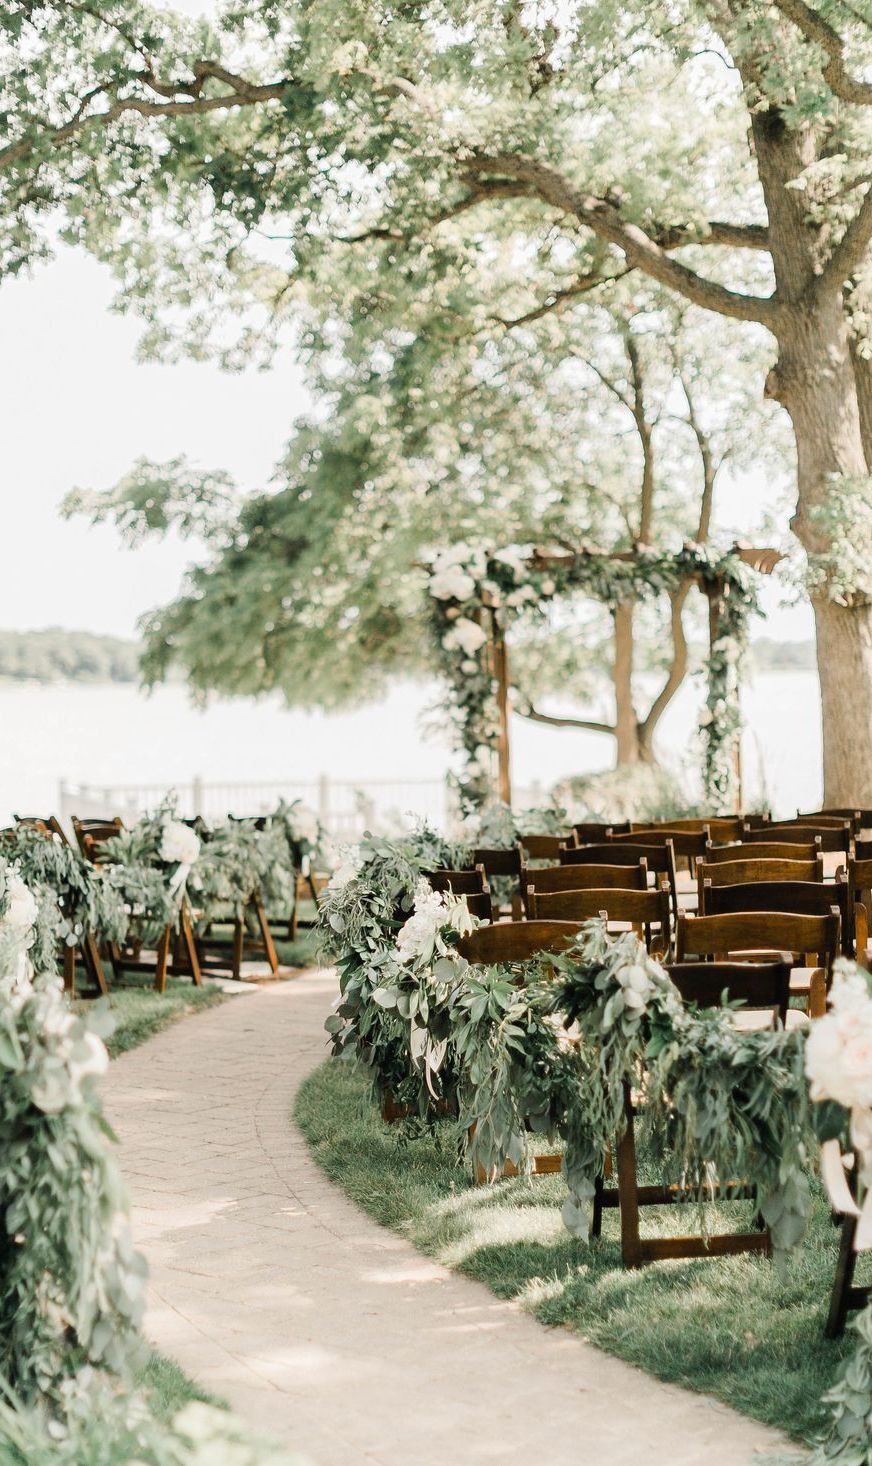 15 Rustic Wedding Ideas - Decor, Venues, and Tips for Rustic Weddings